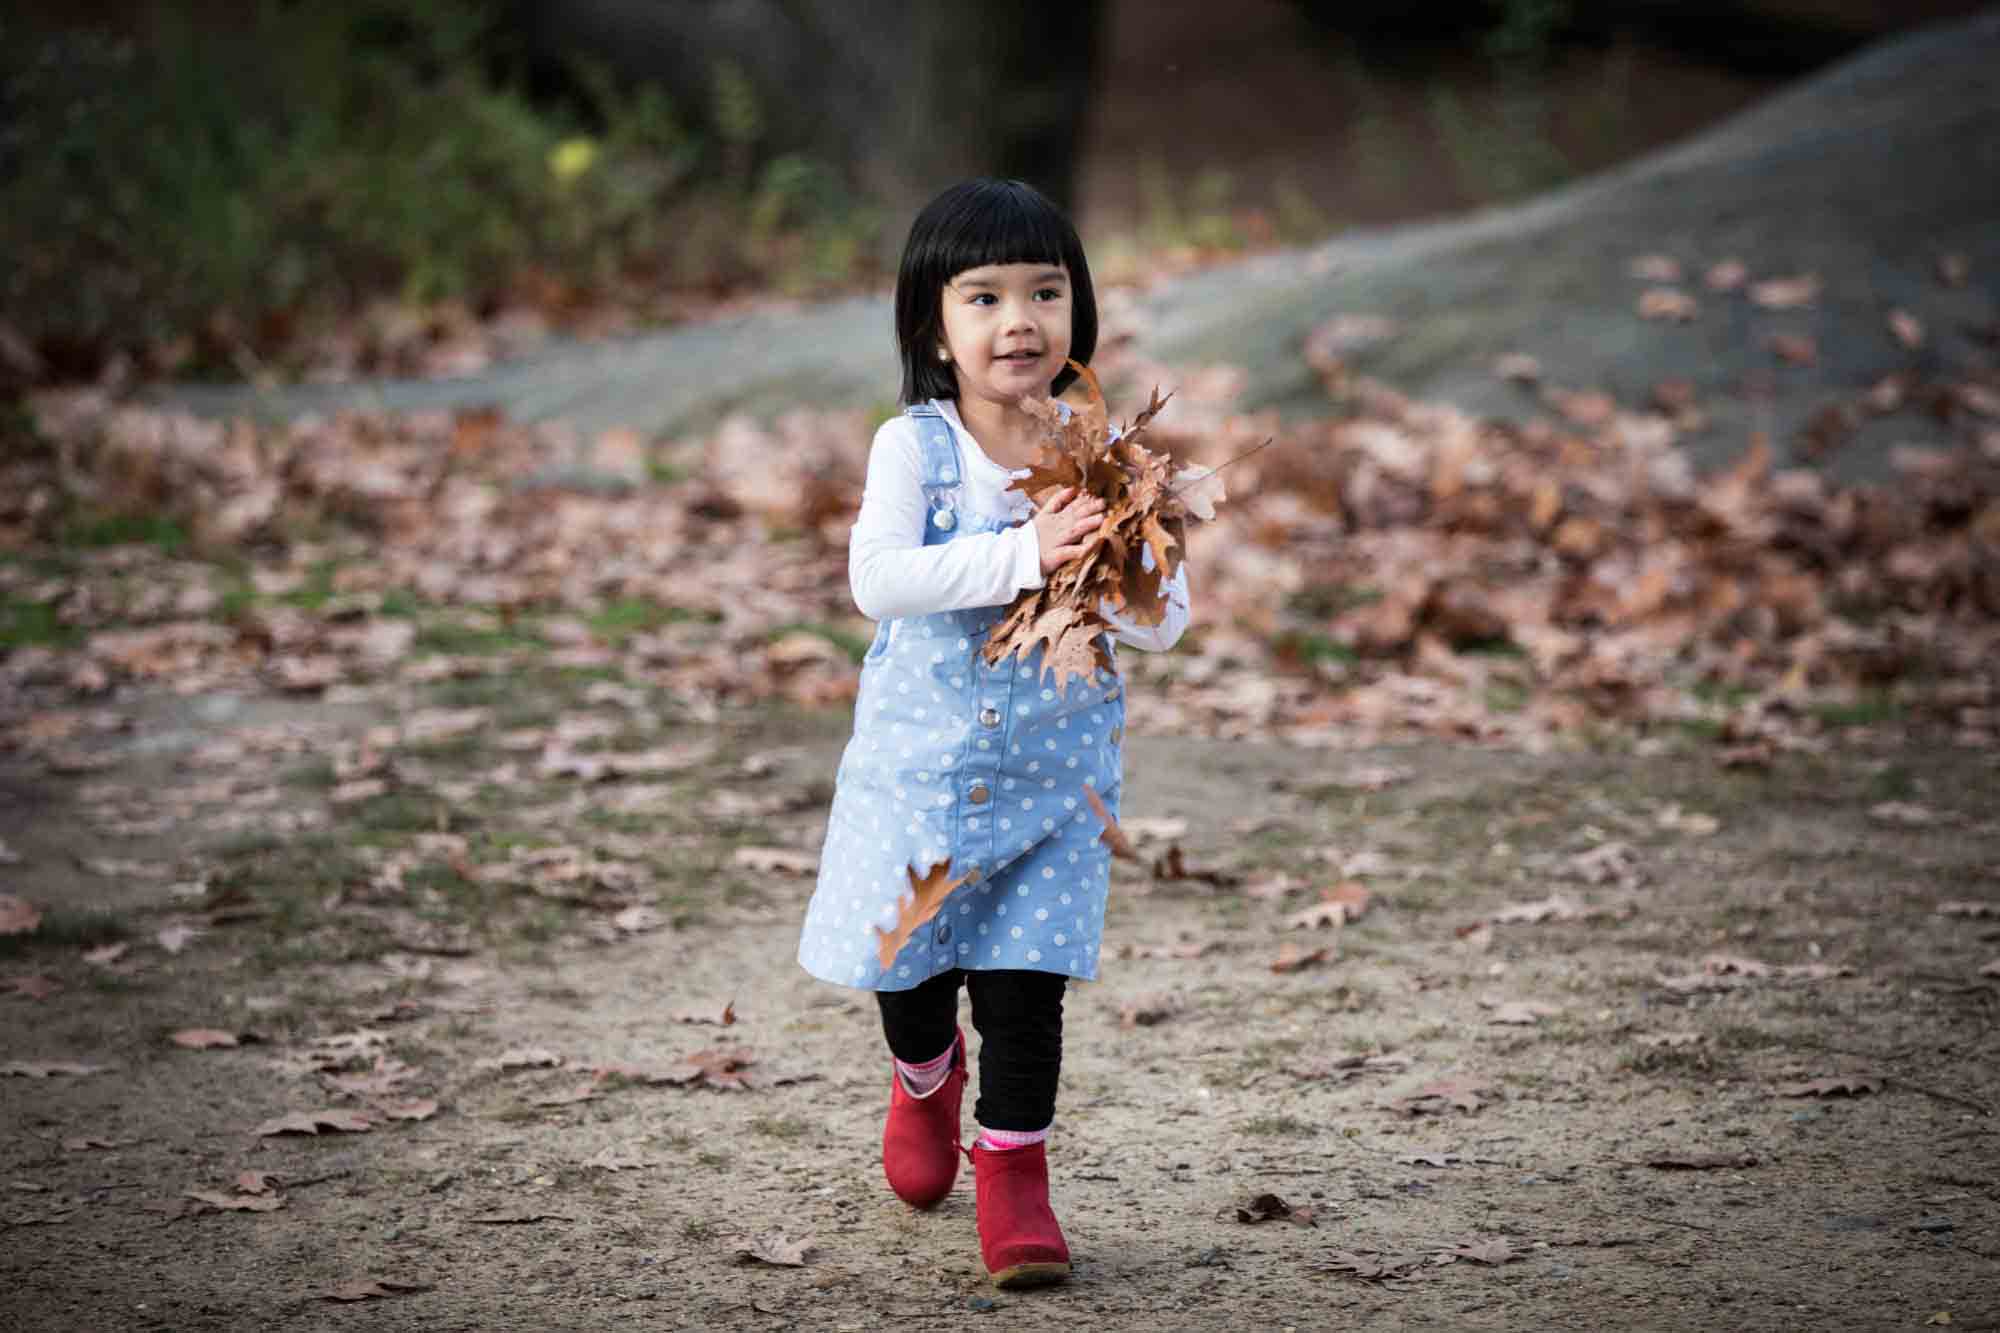 Central Park family portrait of little girl walking with handful of leaves